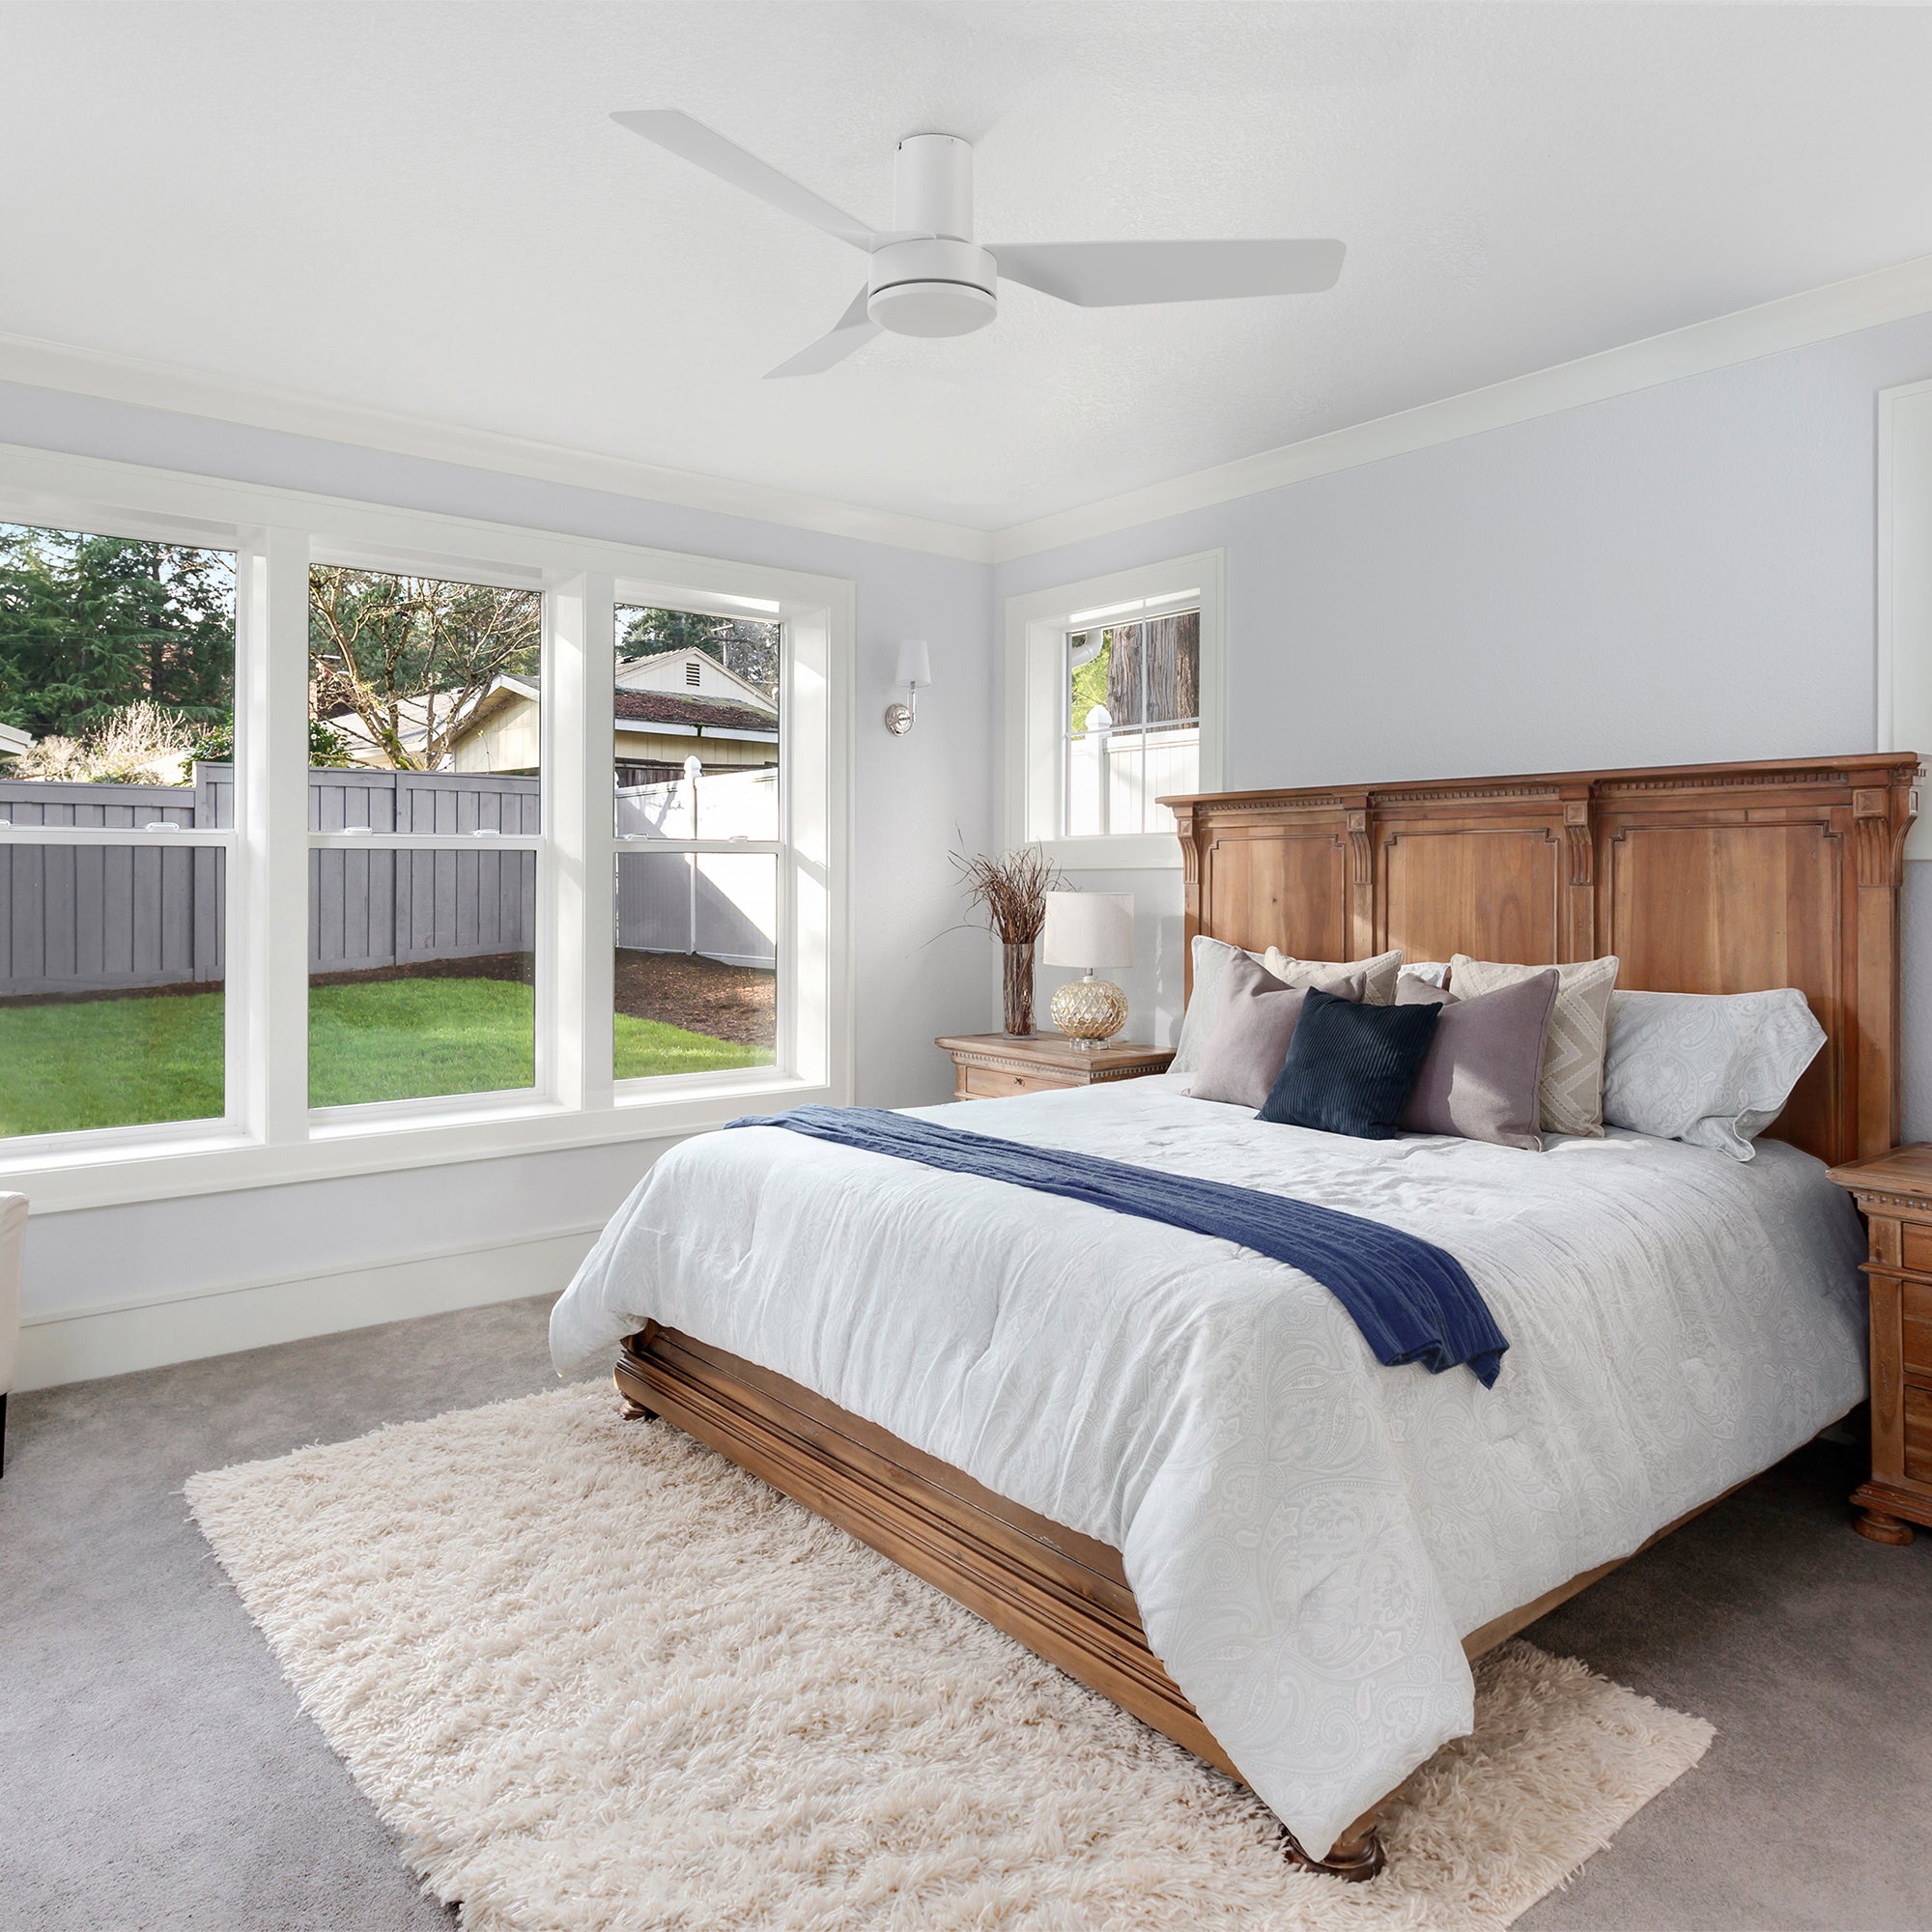 Whisper-quiet morning in your bedroom with the 44inch low profile Ceiling Fan. Remote-controlled, reversible motor, and durable ABS blades for personalized comfort. 